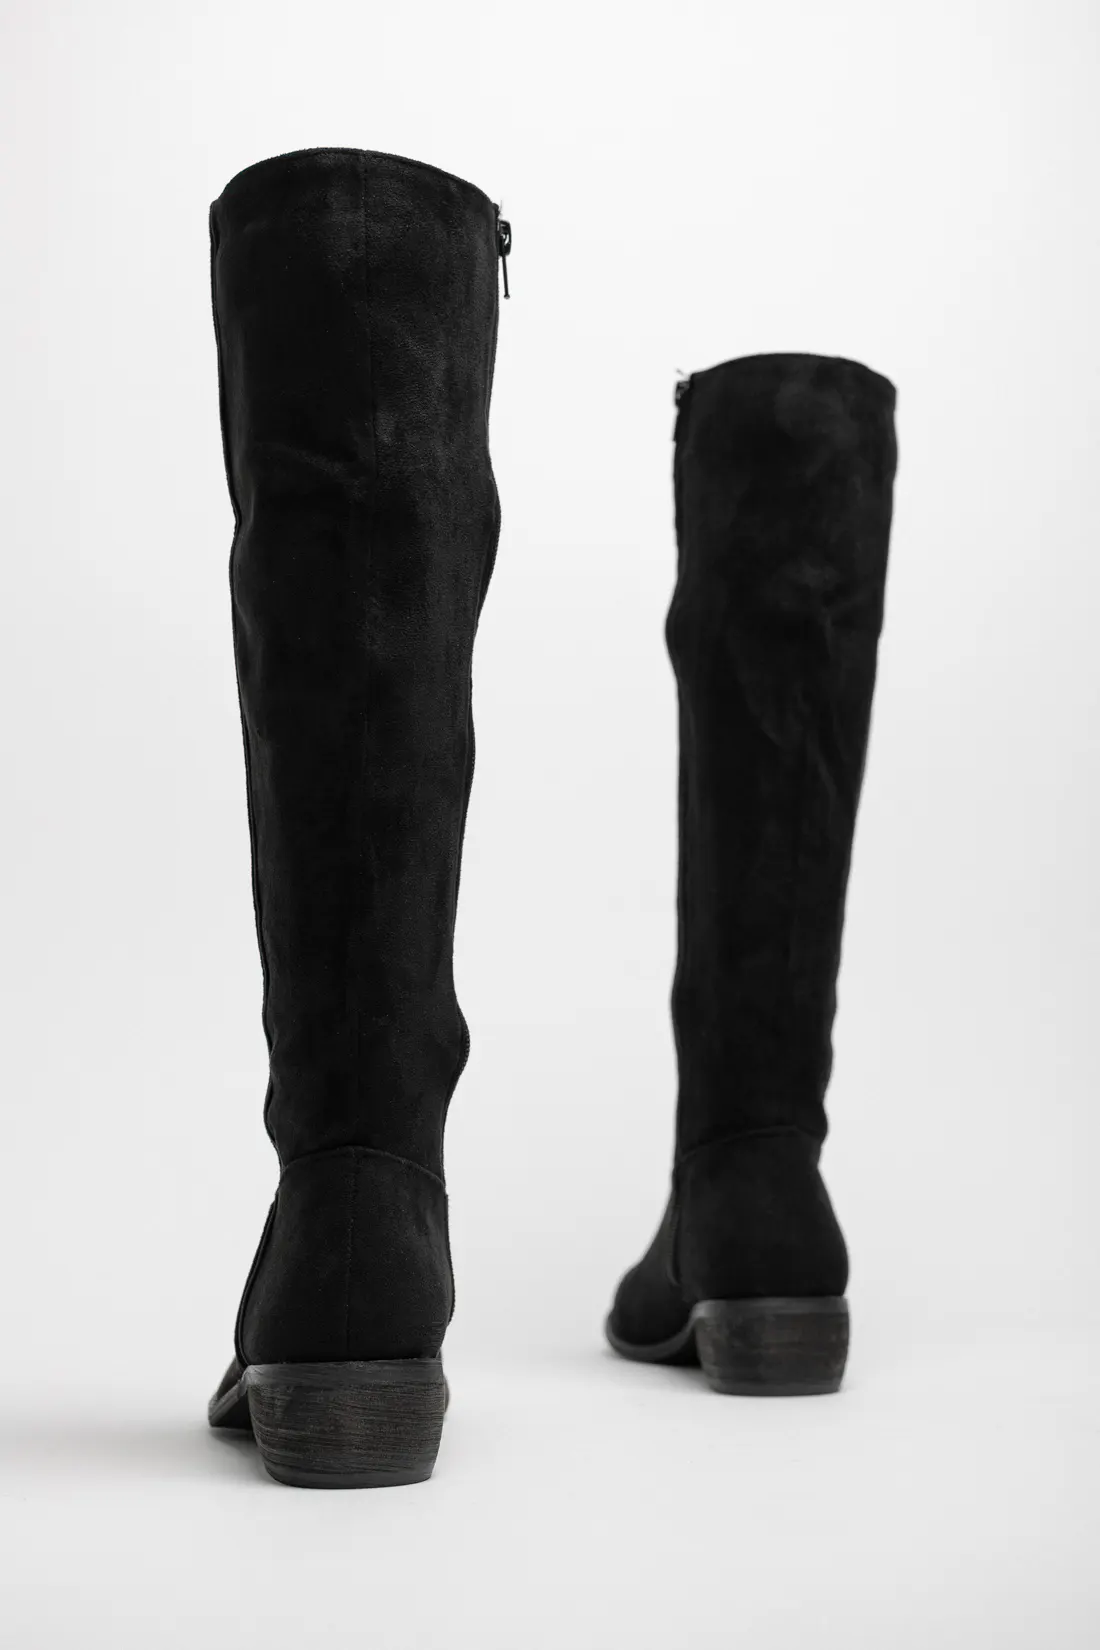 LOMBICO HIGH BOOT - BLACK